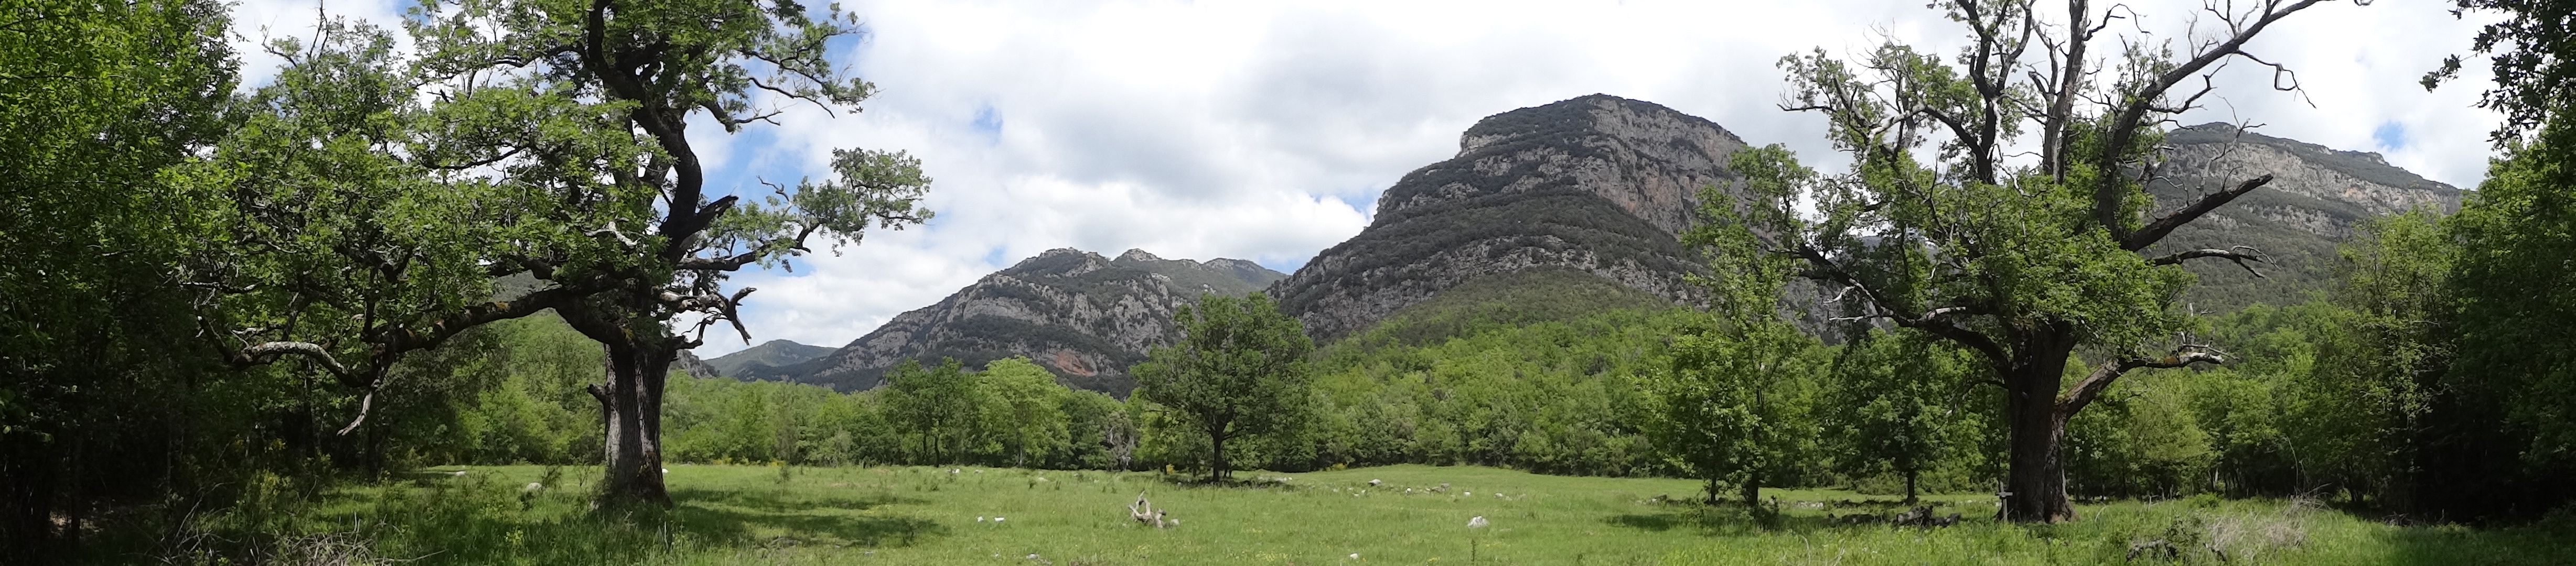 View of Roures d'Ormoier, two oaks labelled as heritage trees in the protected area L'Alta Garrotxa, by Isidro Jabato